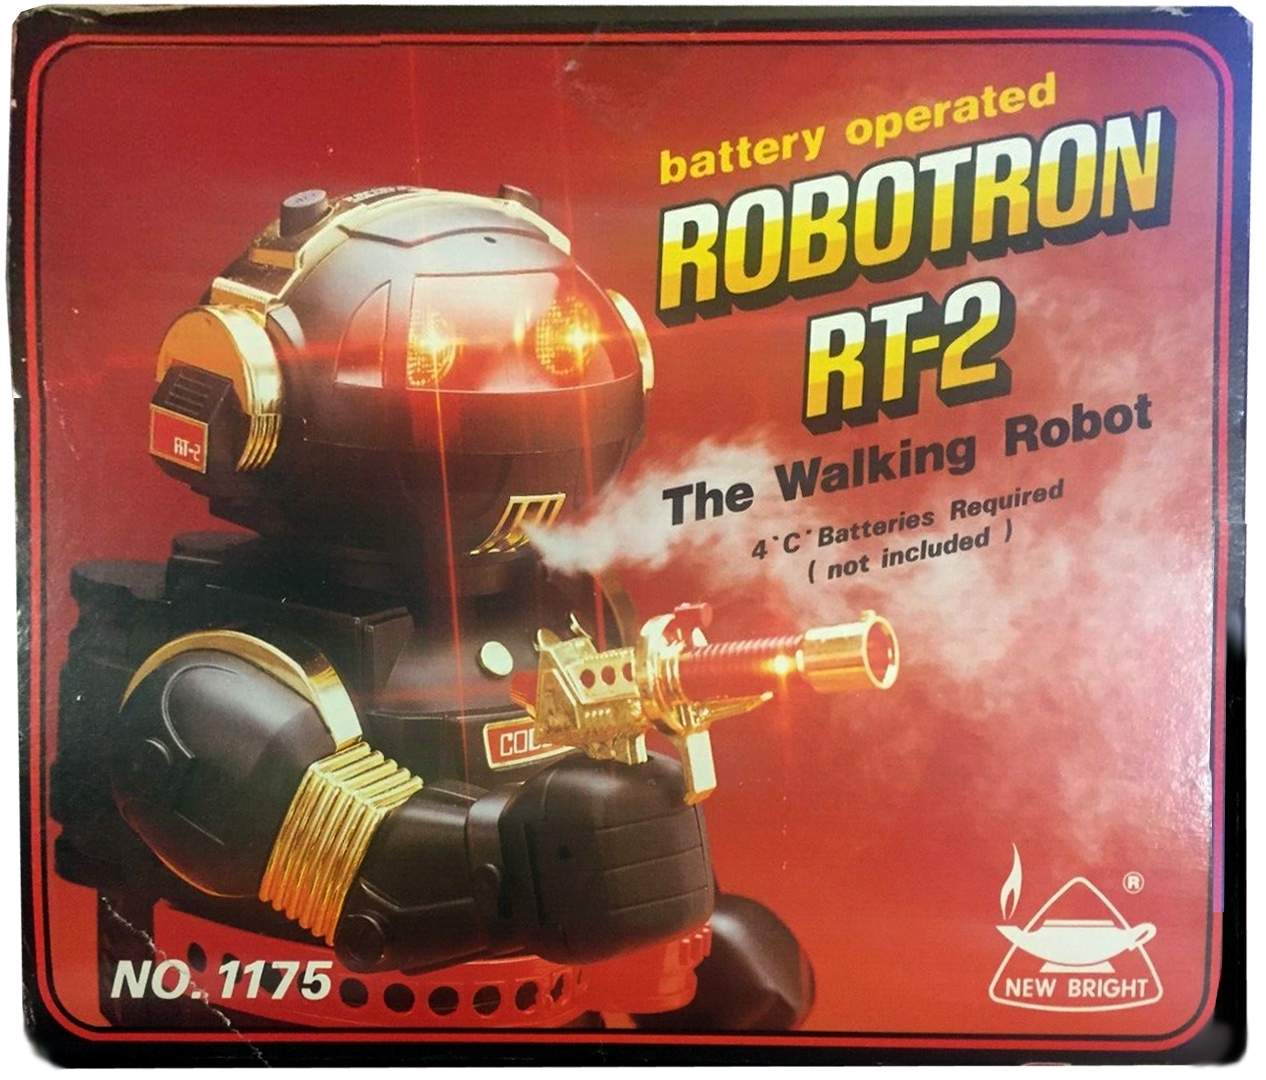 Robotron Robot by New Bright